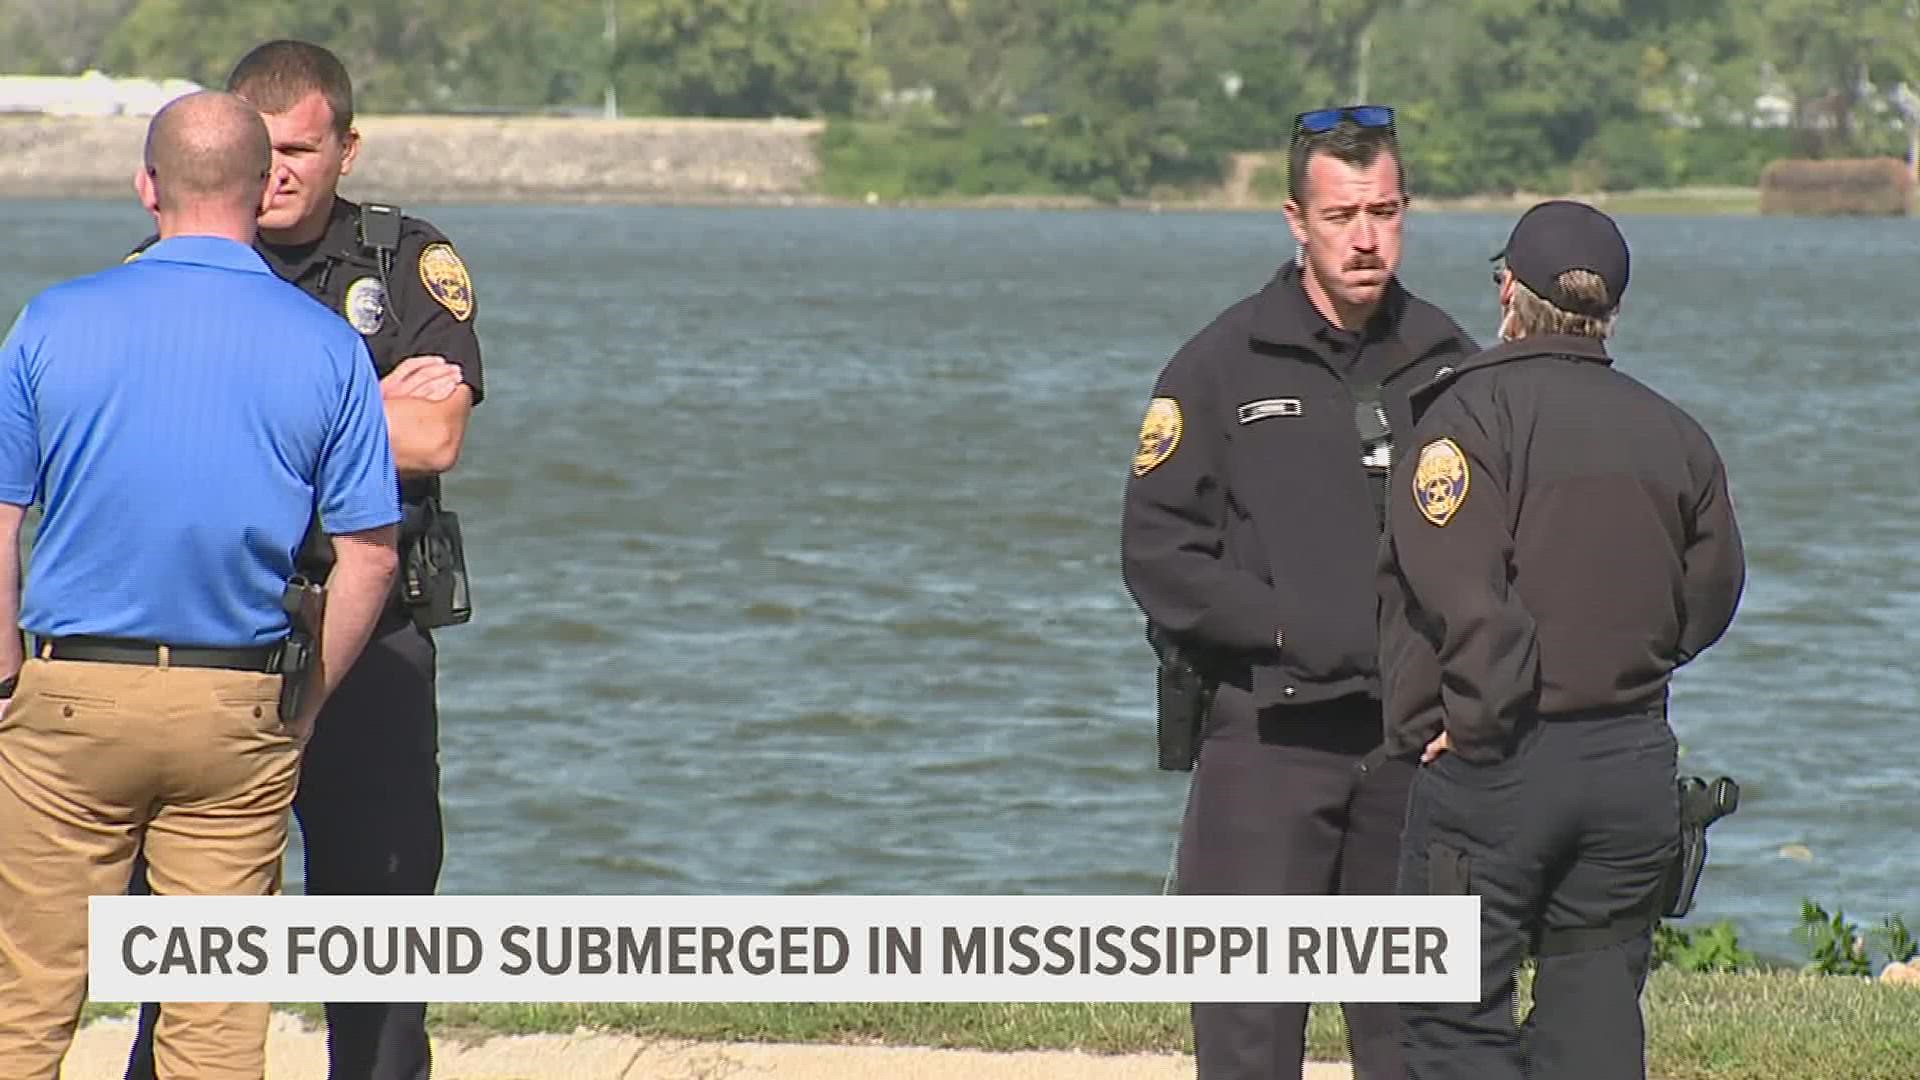 The submerged cars were found near the 55th street boat ramp along Butterworth Parkway. Police say the cars have been submerged for many years.